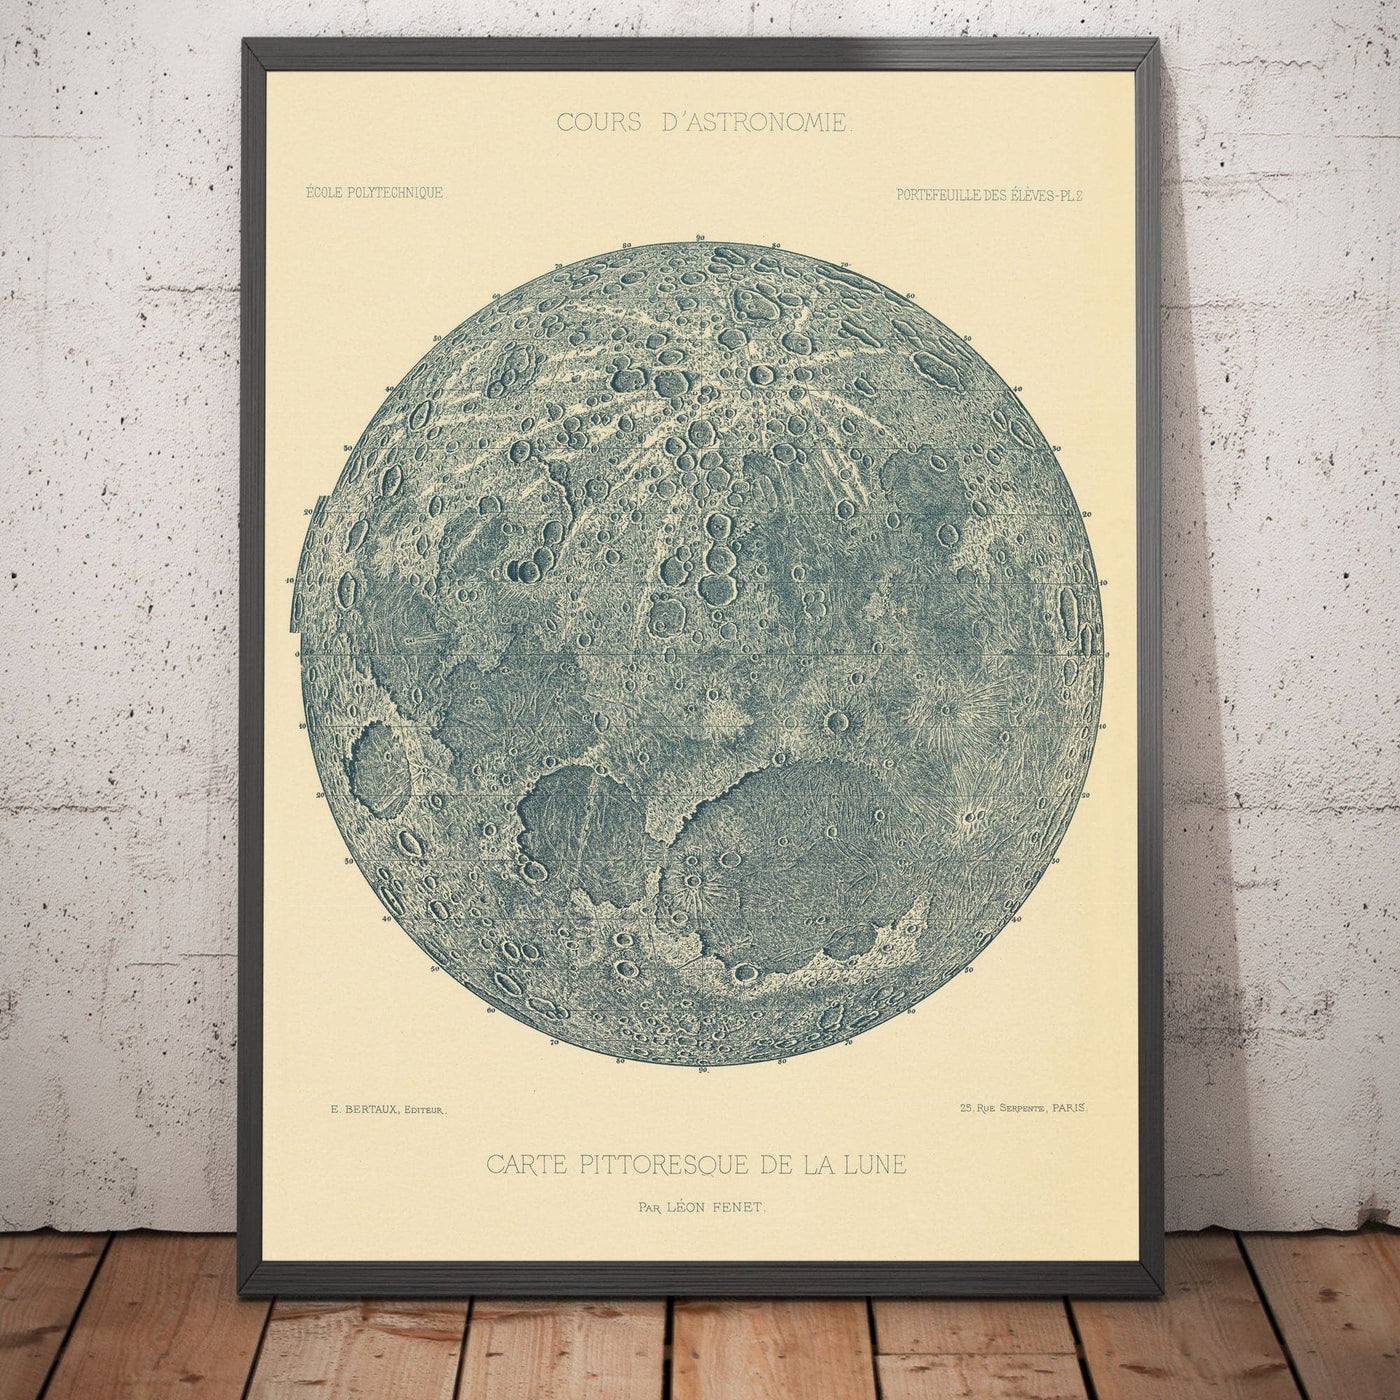 Old Moon Illustration, 1888 by Leon Fenet - French Lunar Chart Lithograph